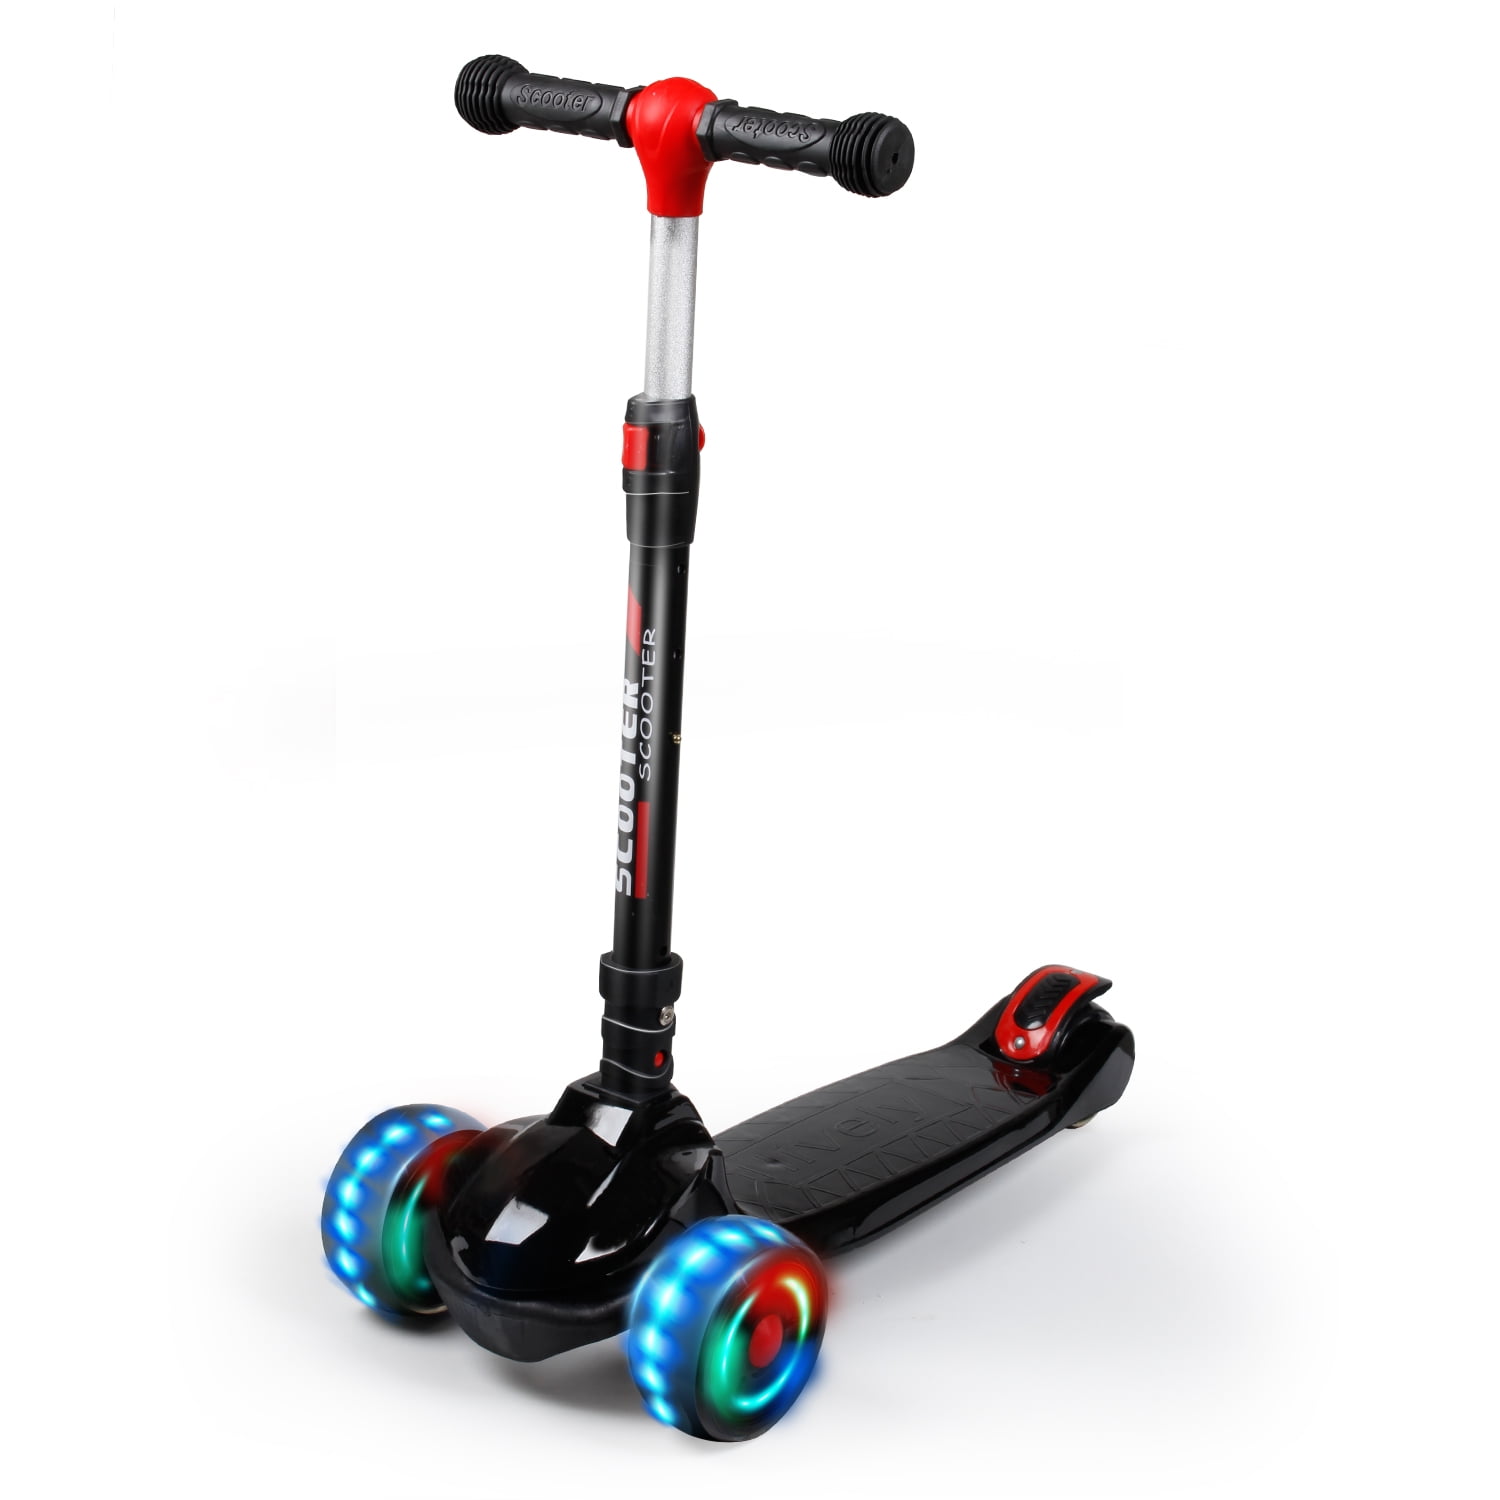 Lean to Steer with PU LED Light Up Wheels for Children from 3 to 14 Years Old Lean to Steer with PU LED Light Up Wheels for Children from 3 to 14 Years Old 4 Adjustable Height BELEEV Kick Scooter for Kids 3 Wheel Scooter for Toddlers Girls & Boys Pink 